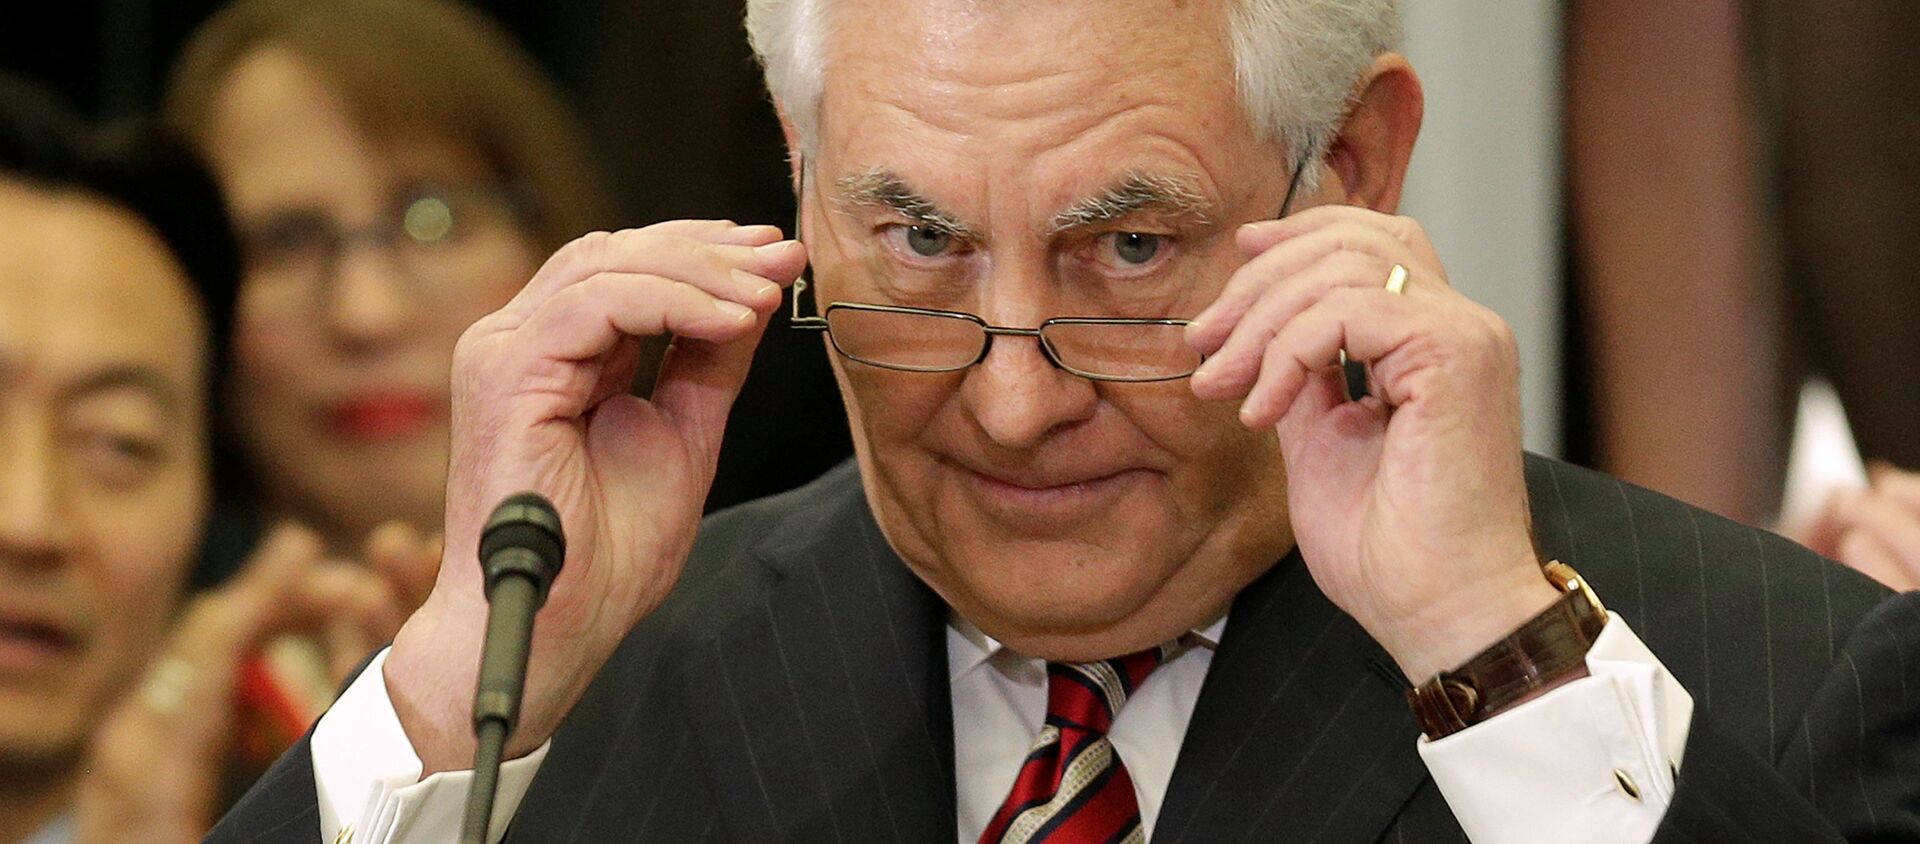 U.S. Secretary of State Rex Tillerson removes his glasses after delivering remarks to Department of State employees upon arrival at the Department of State in Washington, U.S., February 2, 2017 - Sputnik International, 1920, 16.03.2017